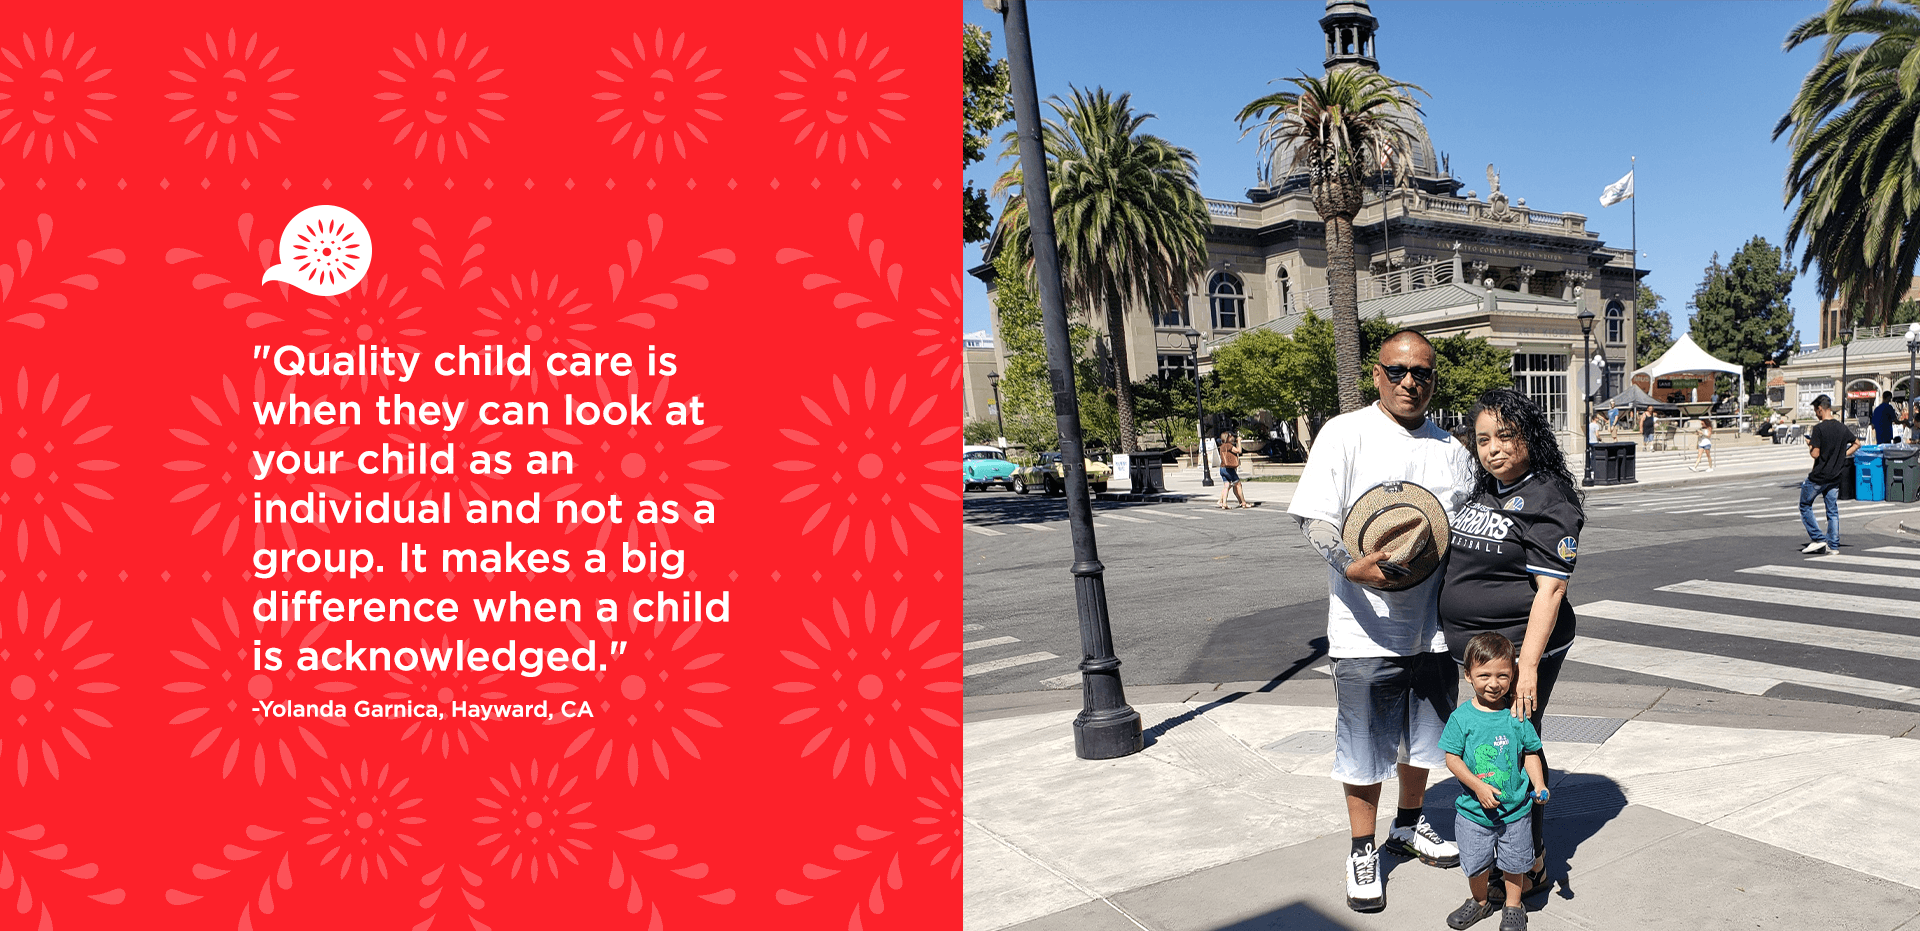 "quality child care is when they can look at your child as an individual and not as a group. It makes a big difference when a child is acknowledged." - Yolanda Garnica